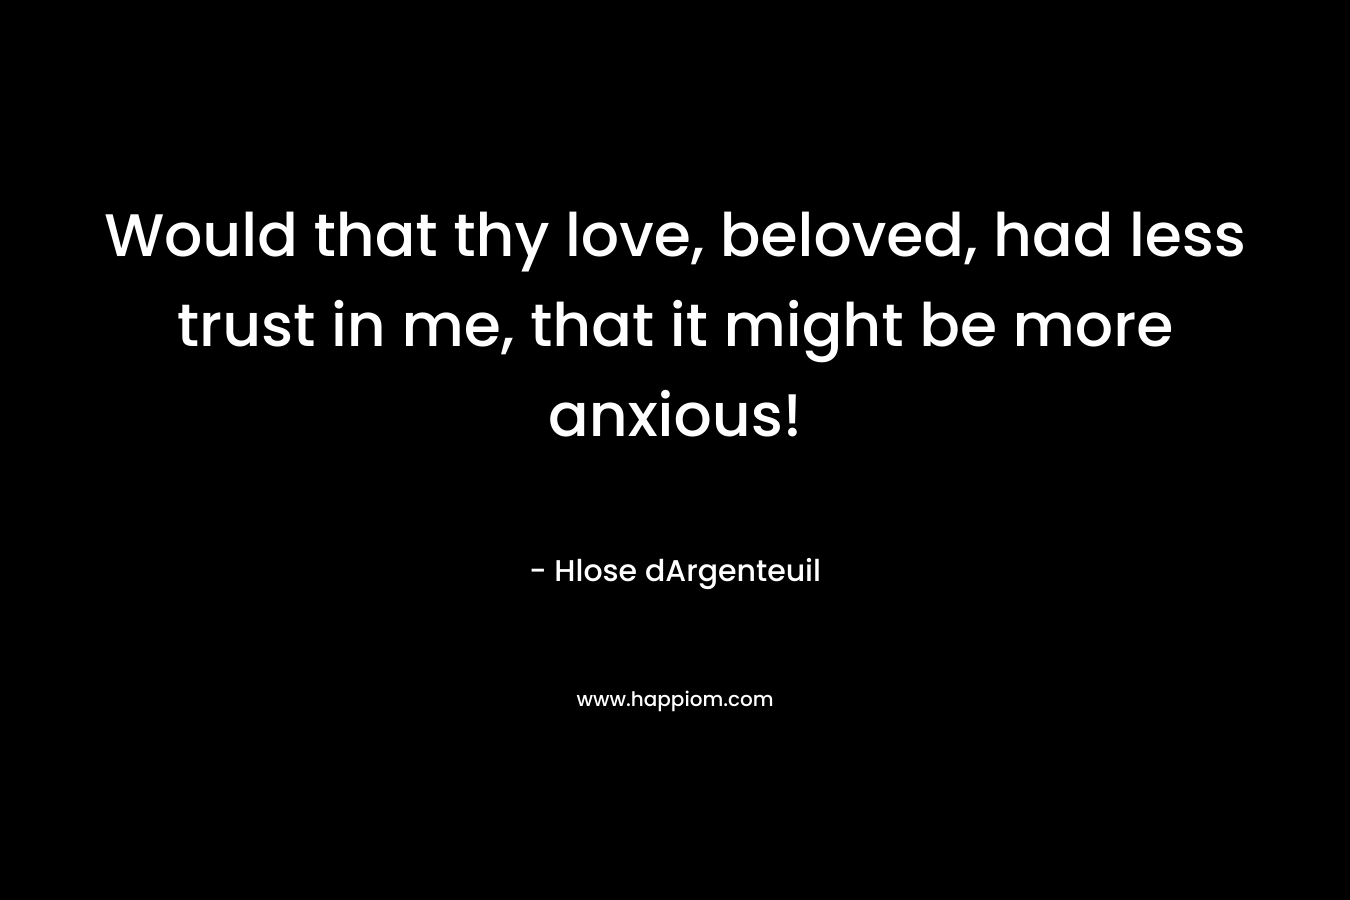 Would that thy love, beloved, had less trust in me, that it might be more anxious! – Hlose dArgenteuil